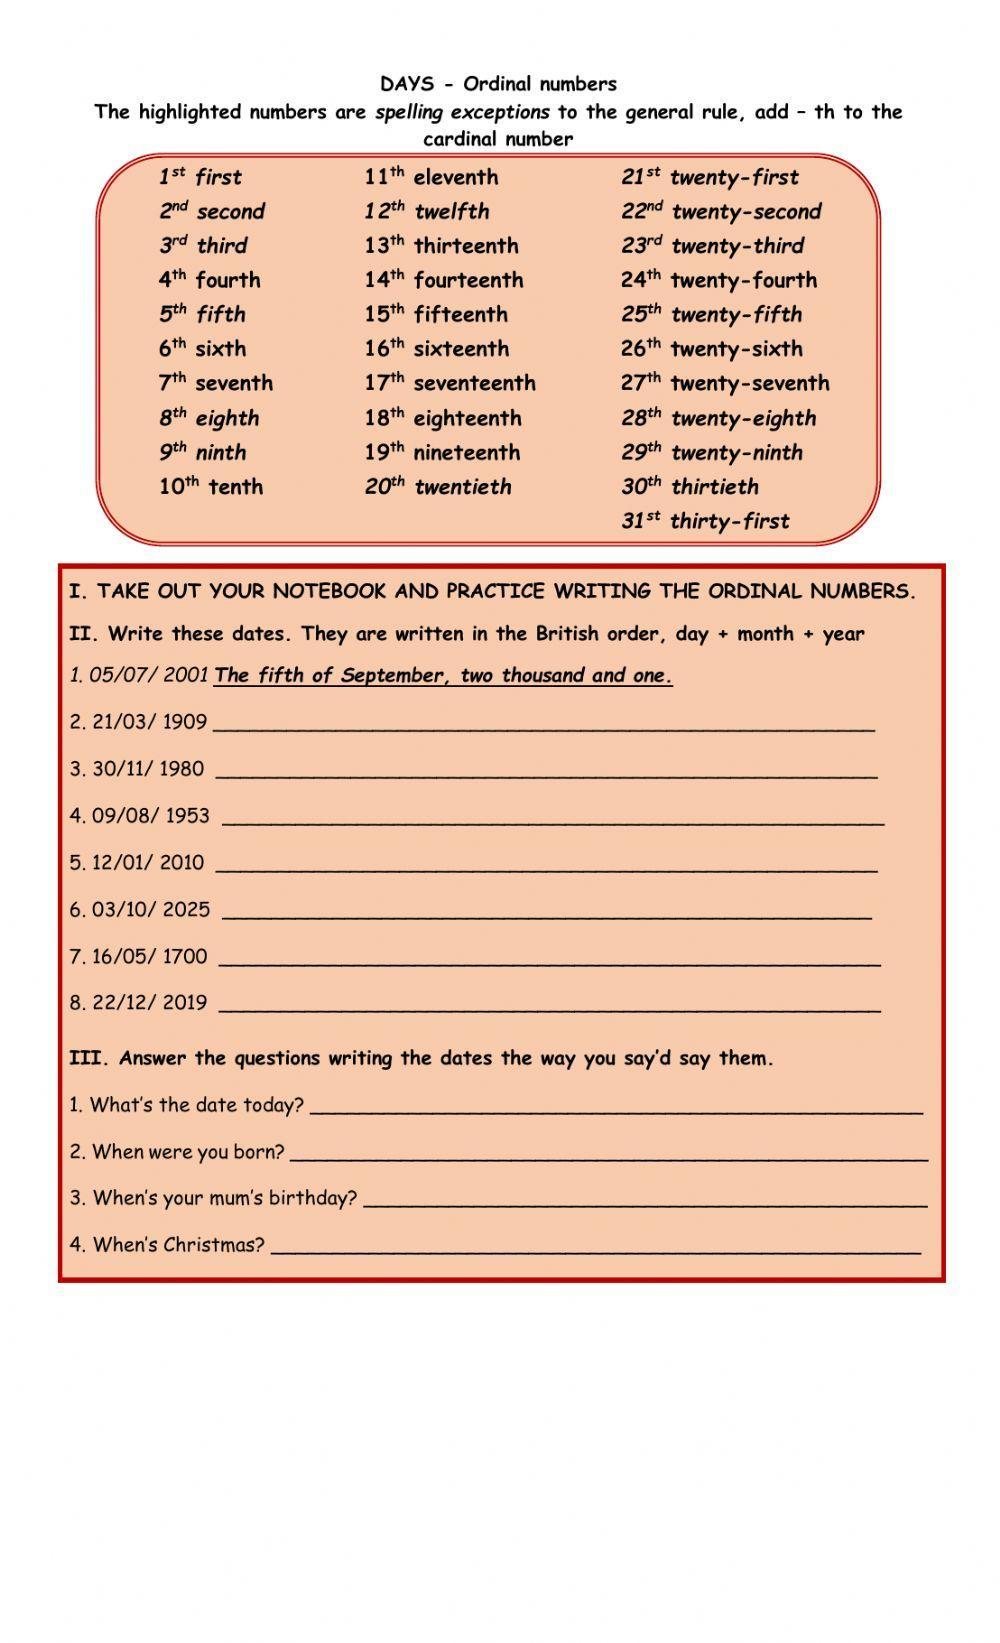 JU1B UNITS 7 - 8 HOW TO SAY THE DATE IN ENGLISH